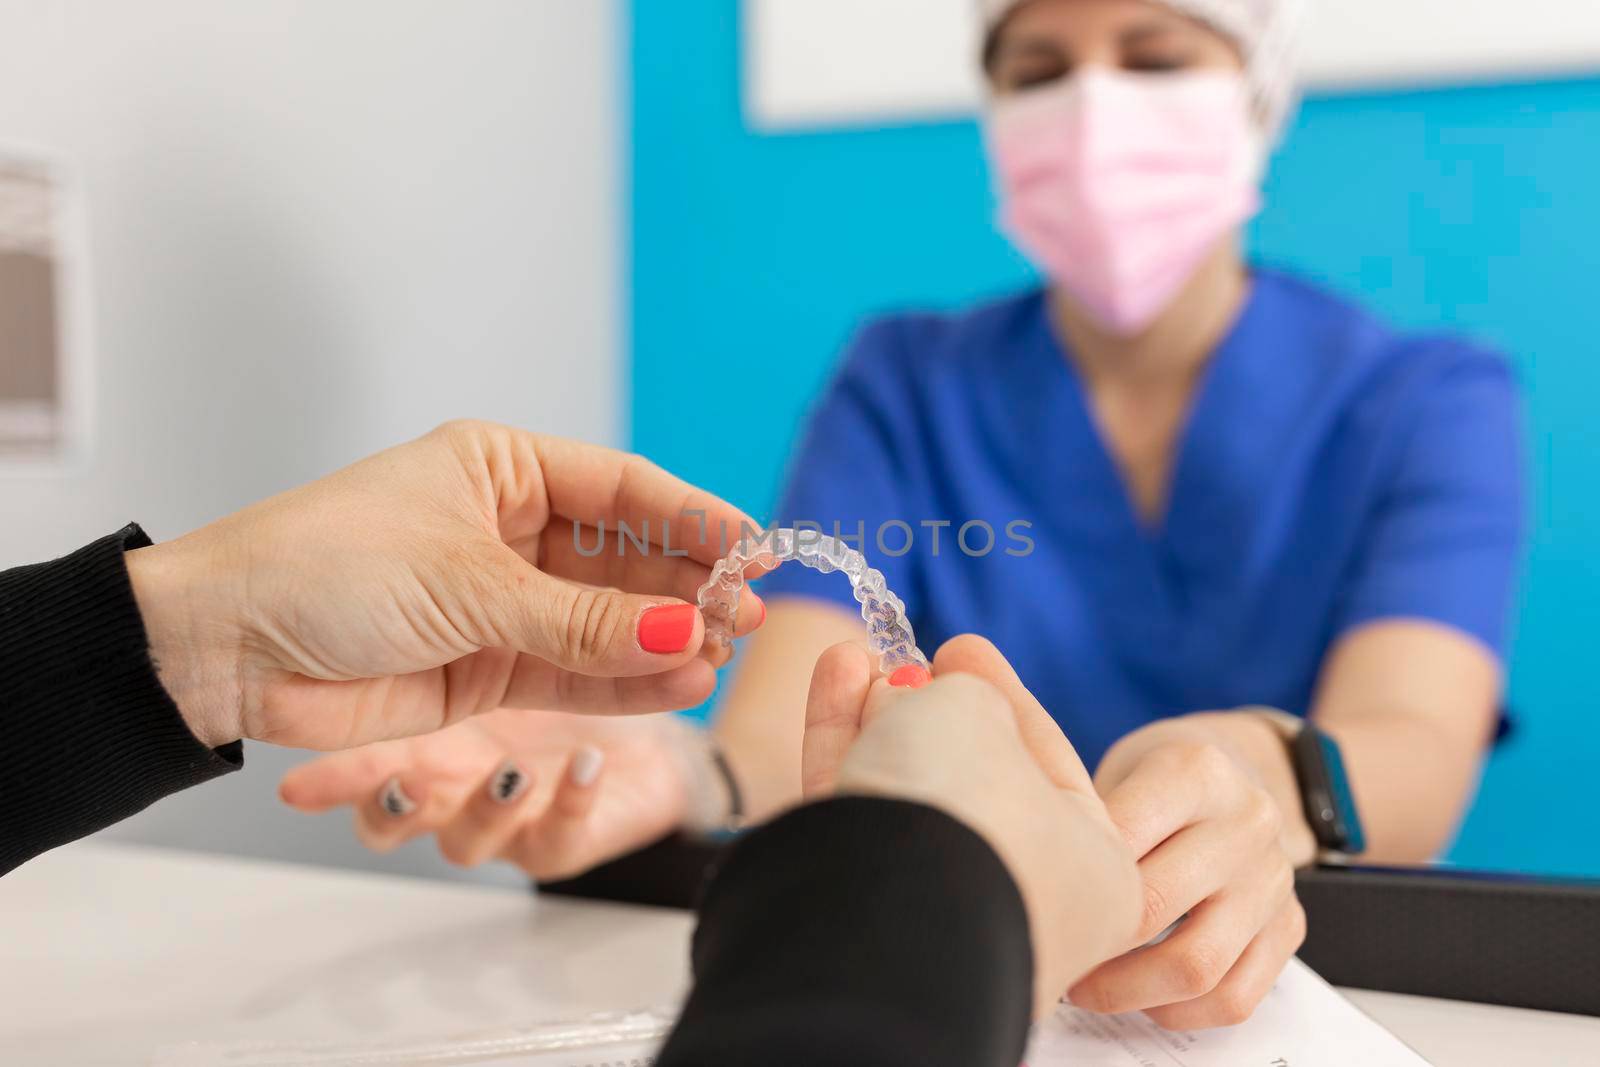 Hands holding invisible orthodontics at the dental clinic by stockrojoverdeyazul